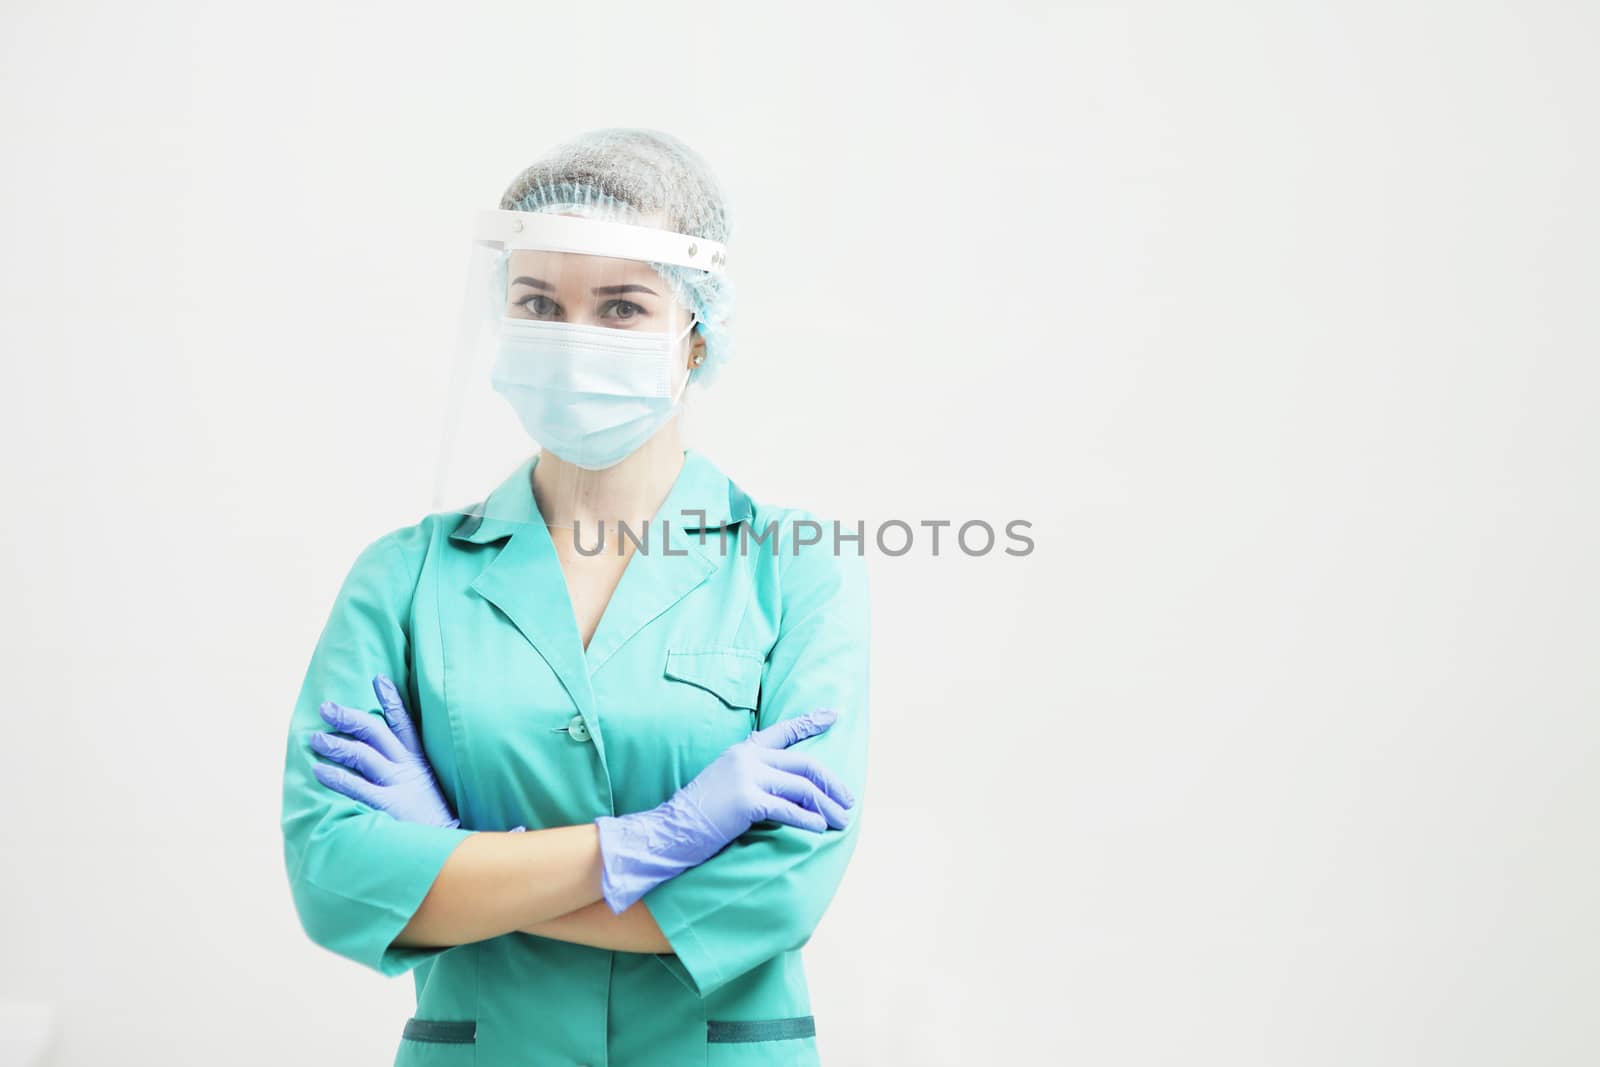 Female doctor or nurse in a protective face mask. Safety measures against the coronavirus. Prevention Covid-19 healthcare concept. Protective gloves on hands